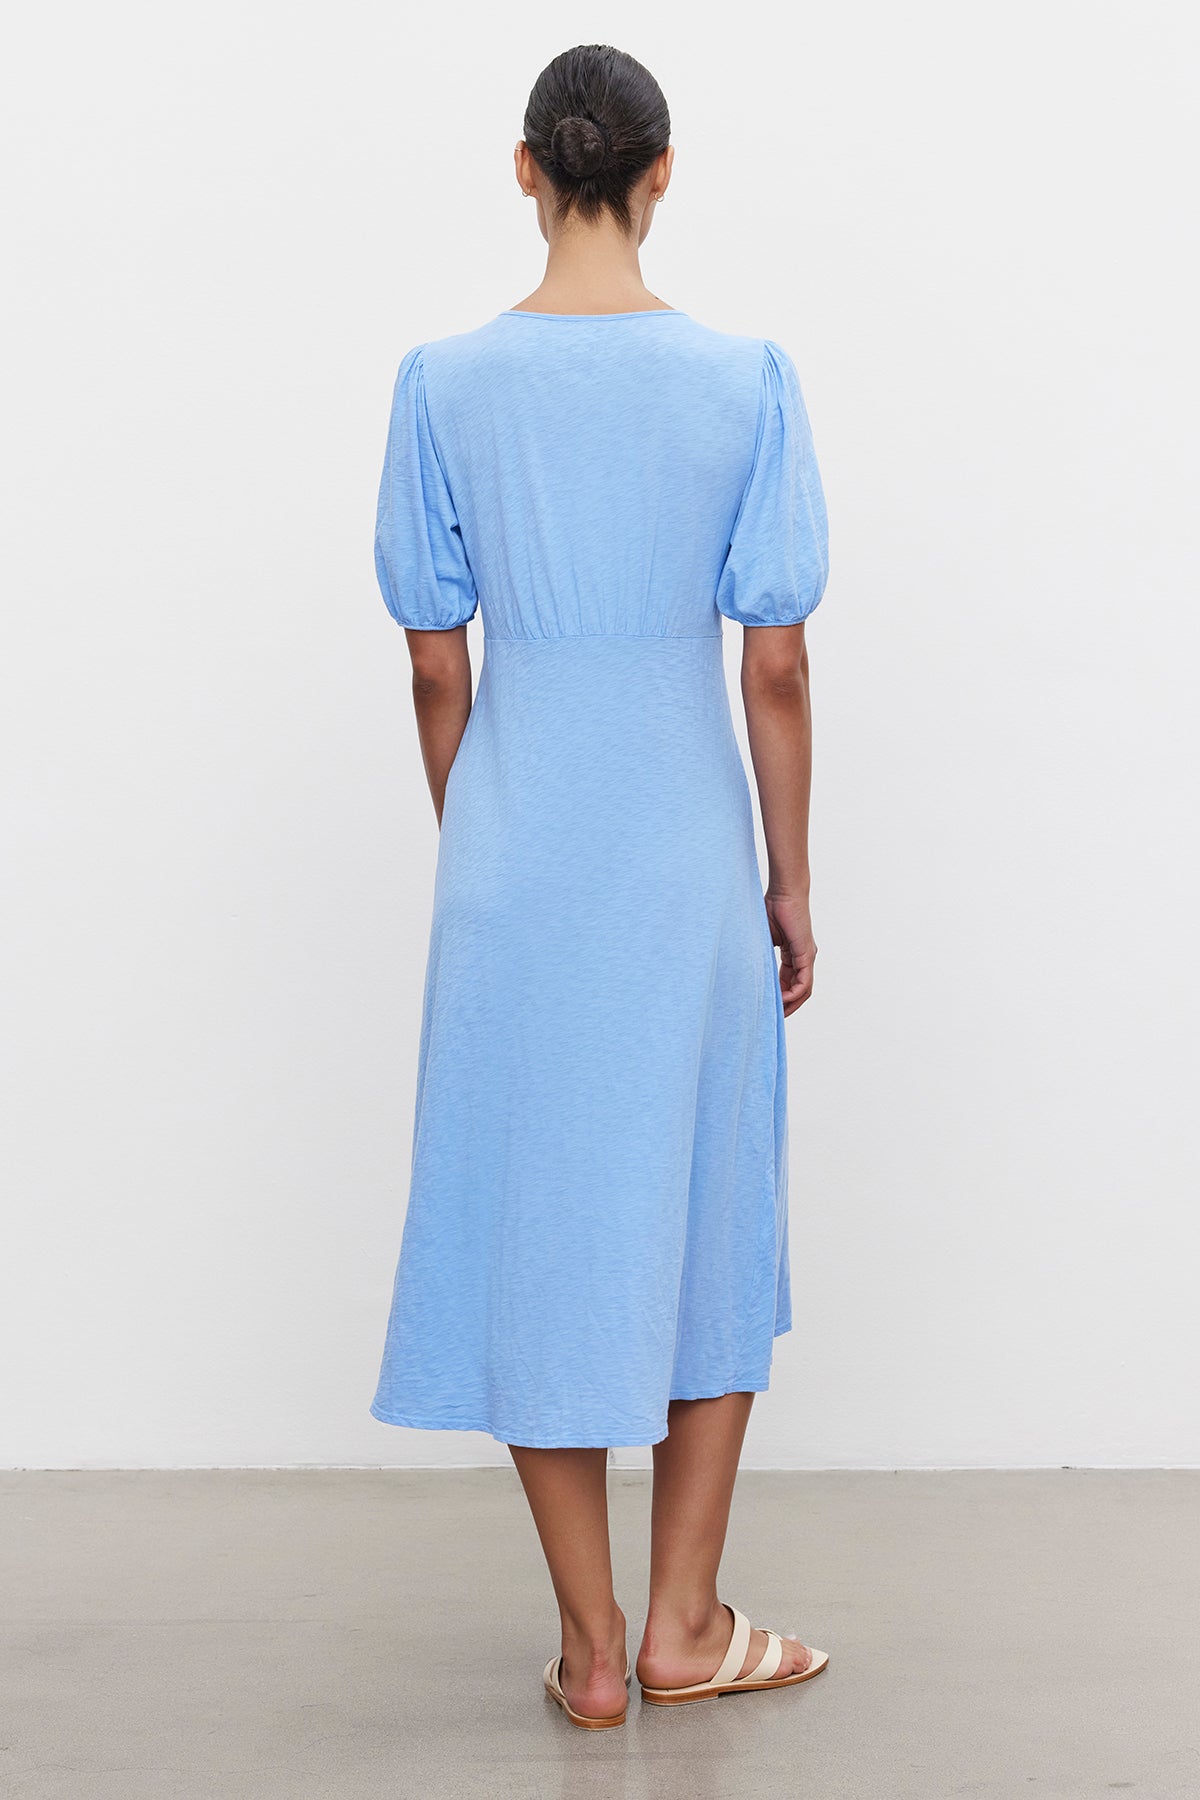 A woman stands with her back to the camera, wearing a Velvet by Graham & Spencer PARKER COTTON SLUB MIDI DRESS with puffed sleeves and sandals.-36691474809025